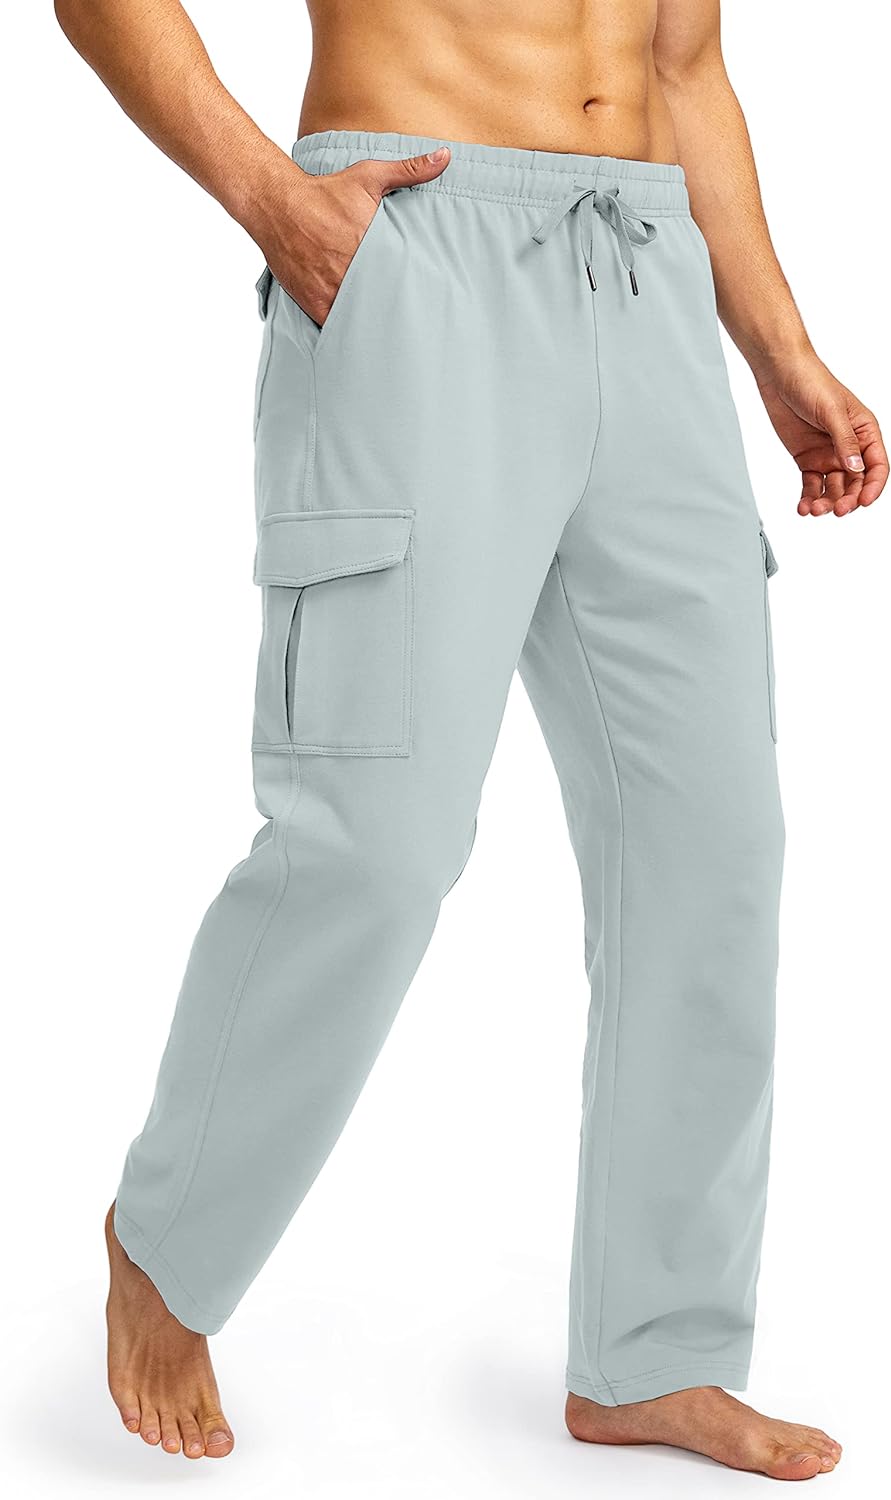 Pudolla Men's Cotton Sweatpants with Cargo Pockets Open Bottom